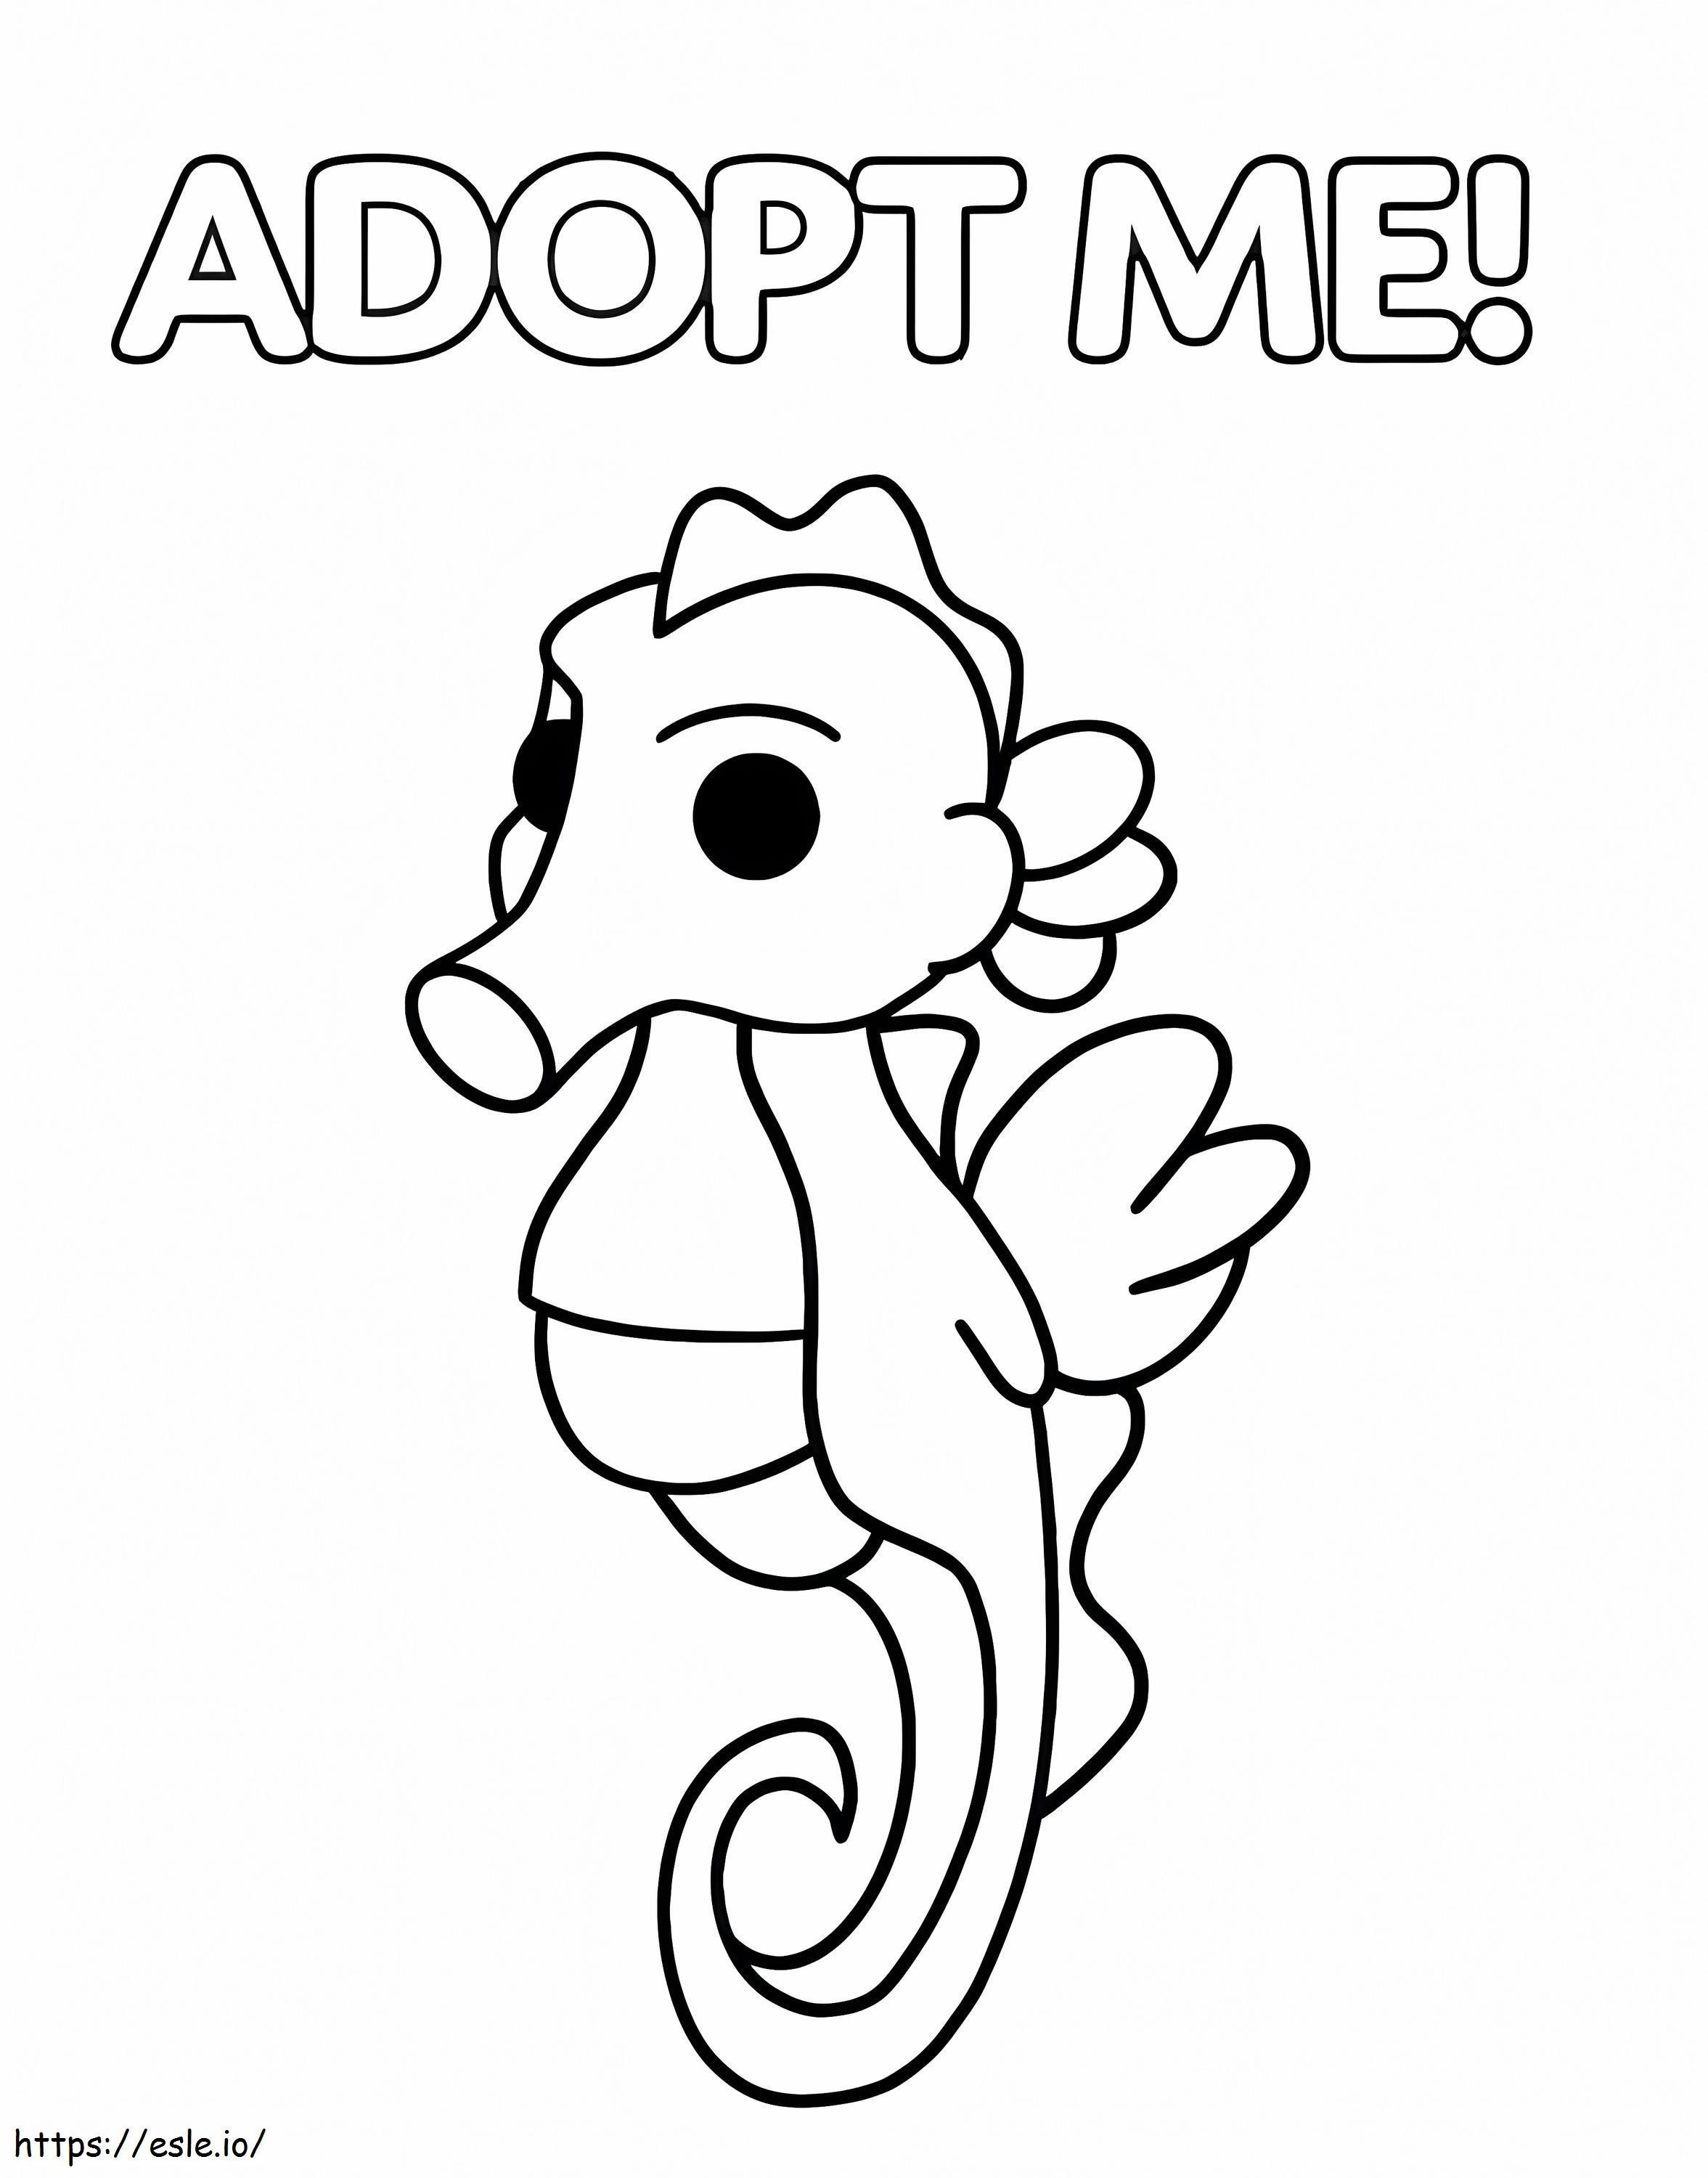 Seahorse Adopt Me coloring page